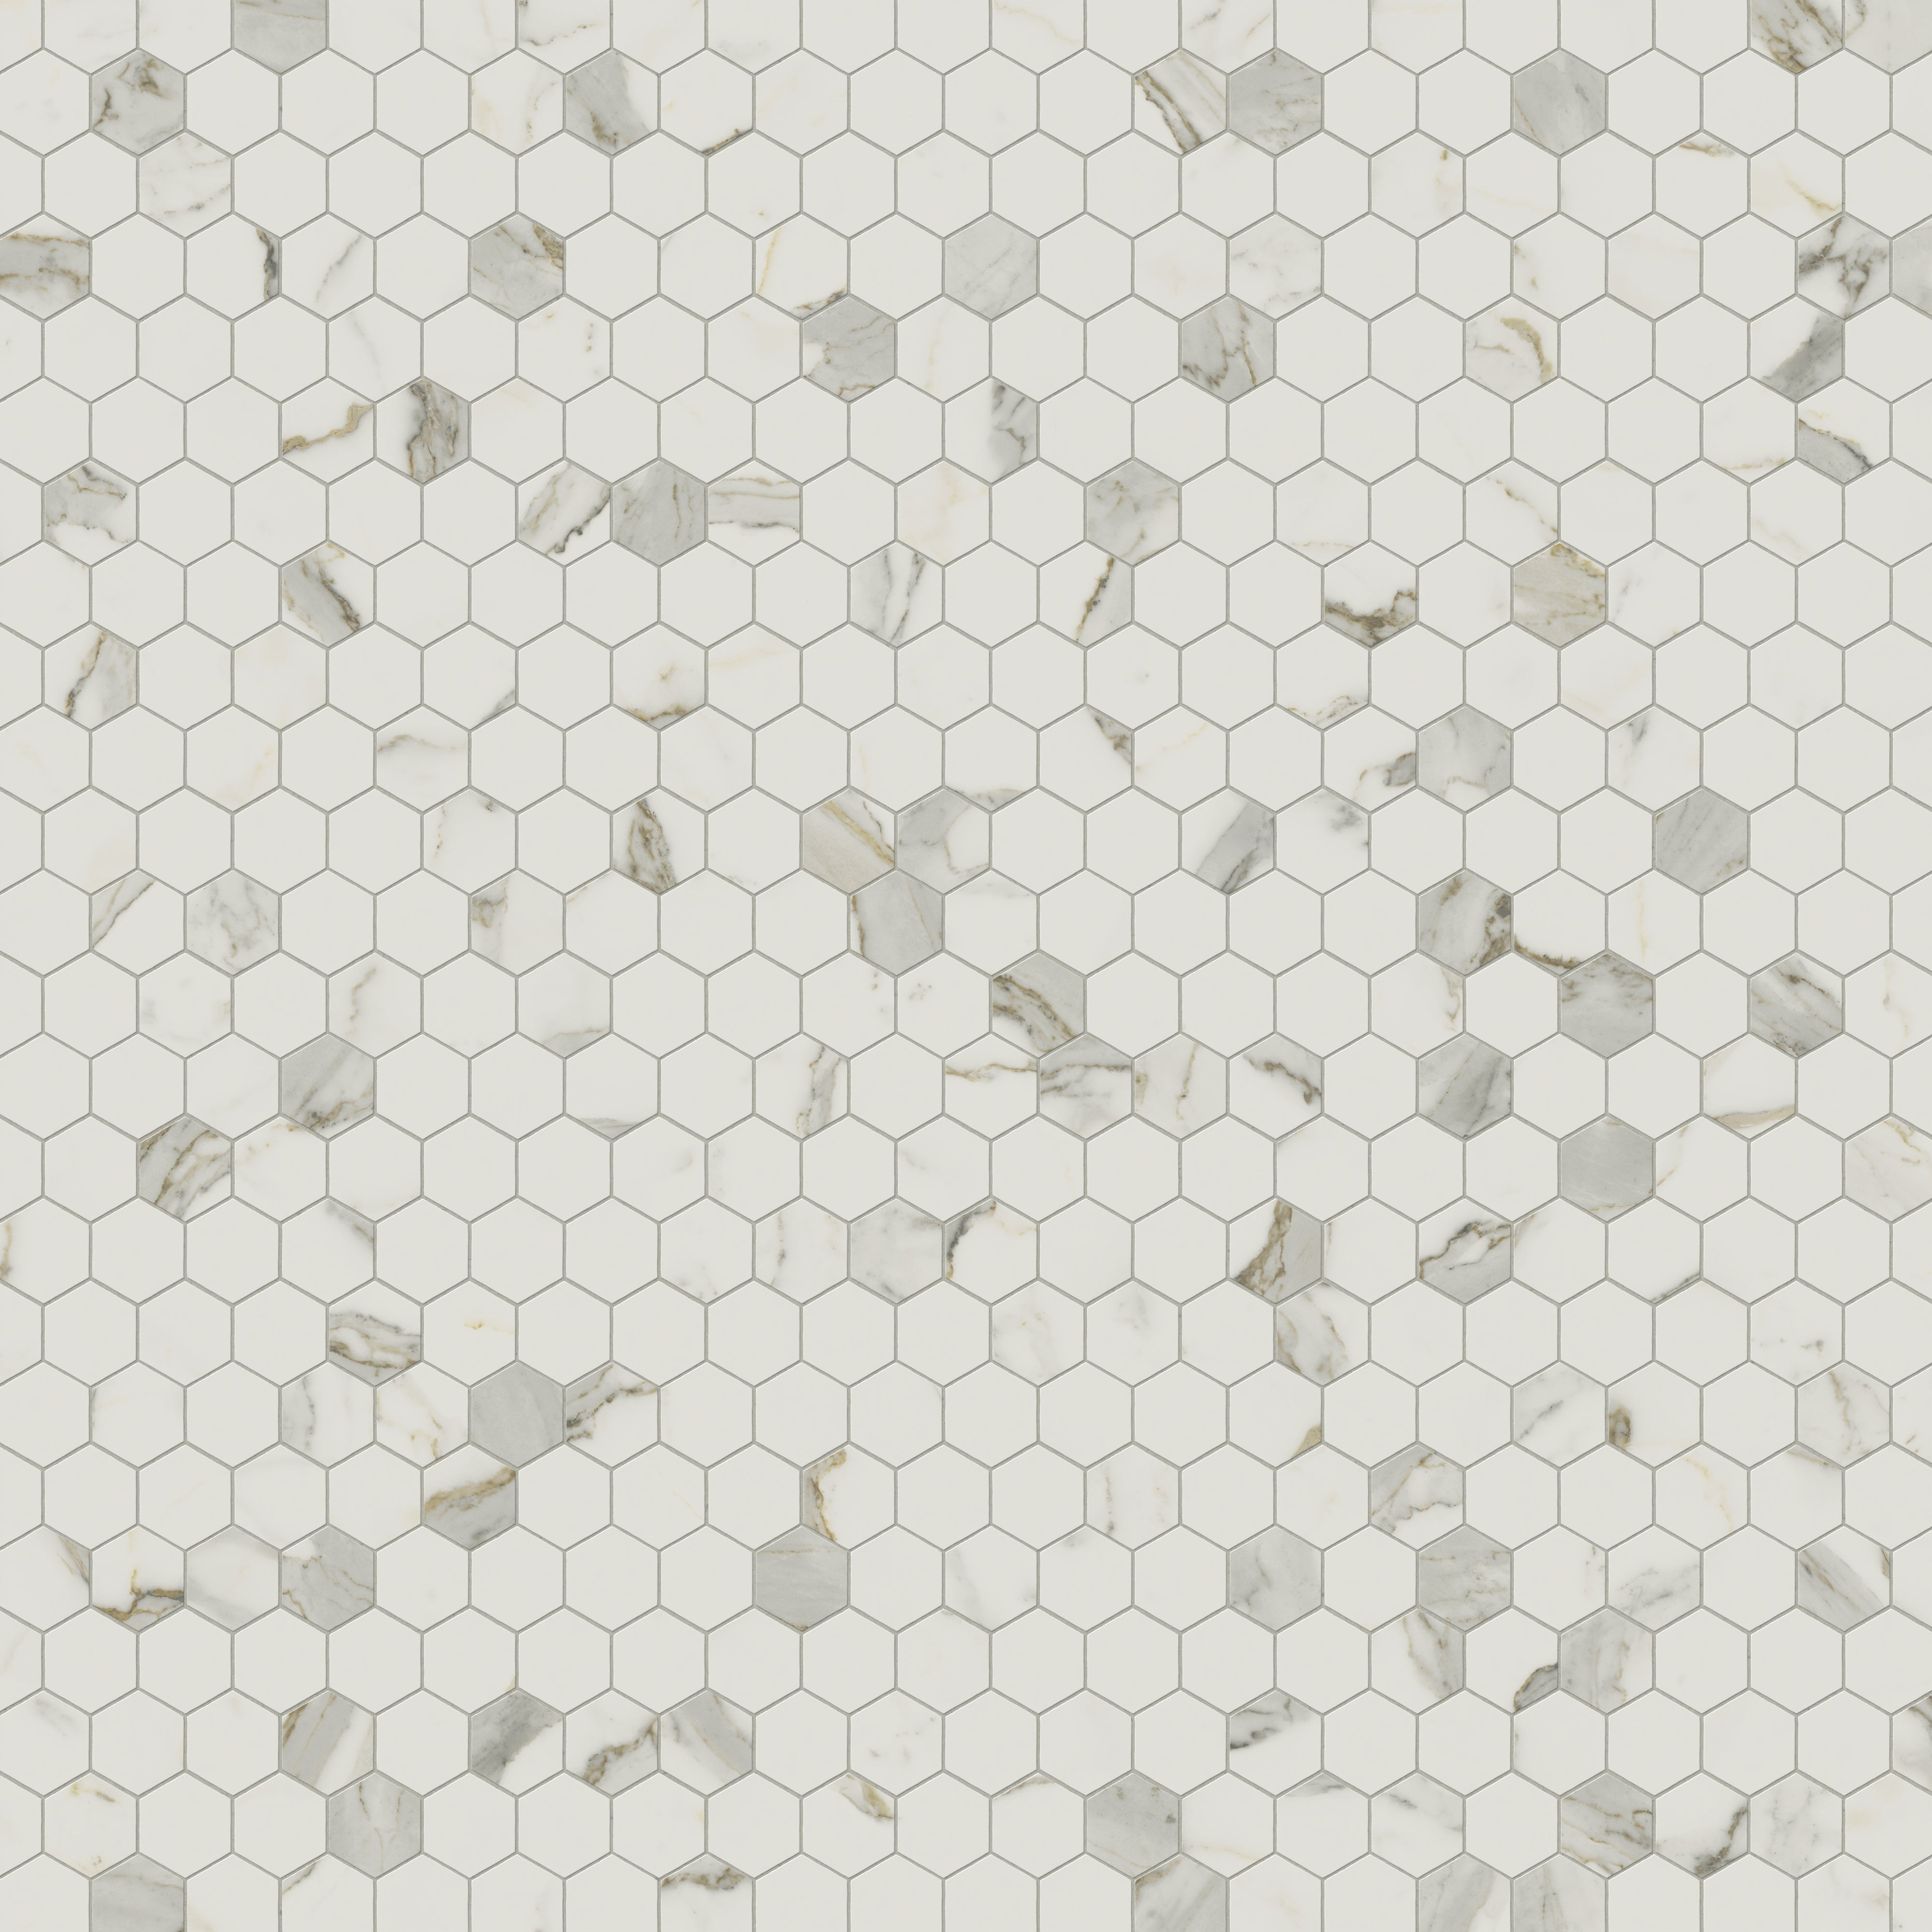 Aniston 2x2 Polished Porcelain Hexagon Mosaic Tile in Calacatta Top